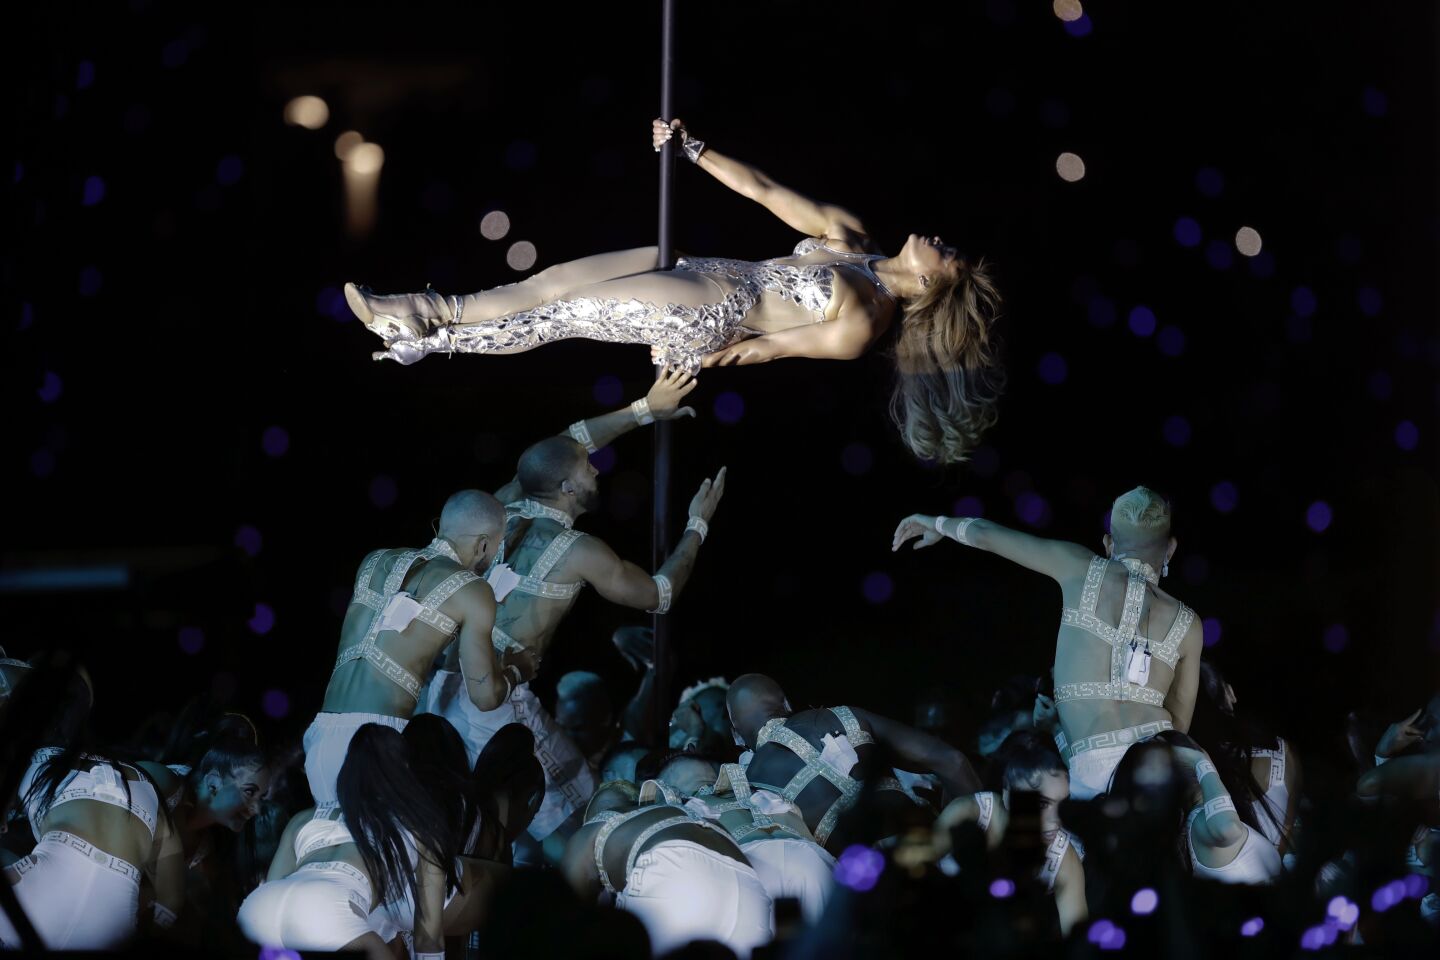 Jennifer Lopez performs during the Super Bowl LIV halftime show at Hard Rock Stadium in Miami Gardens, Fla.